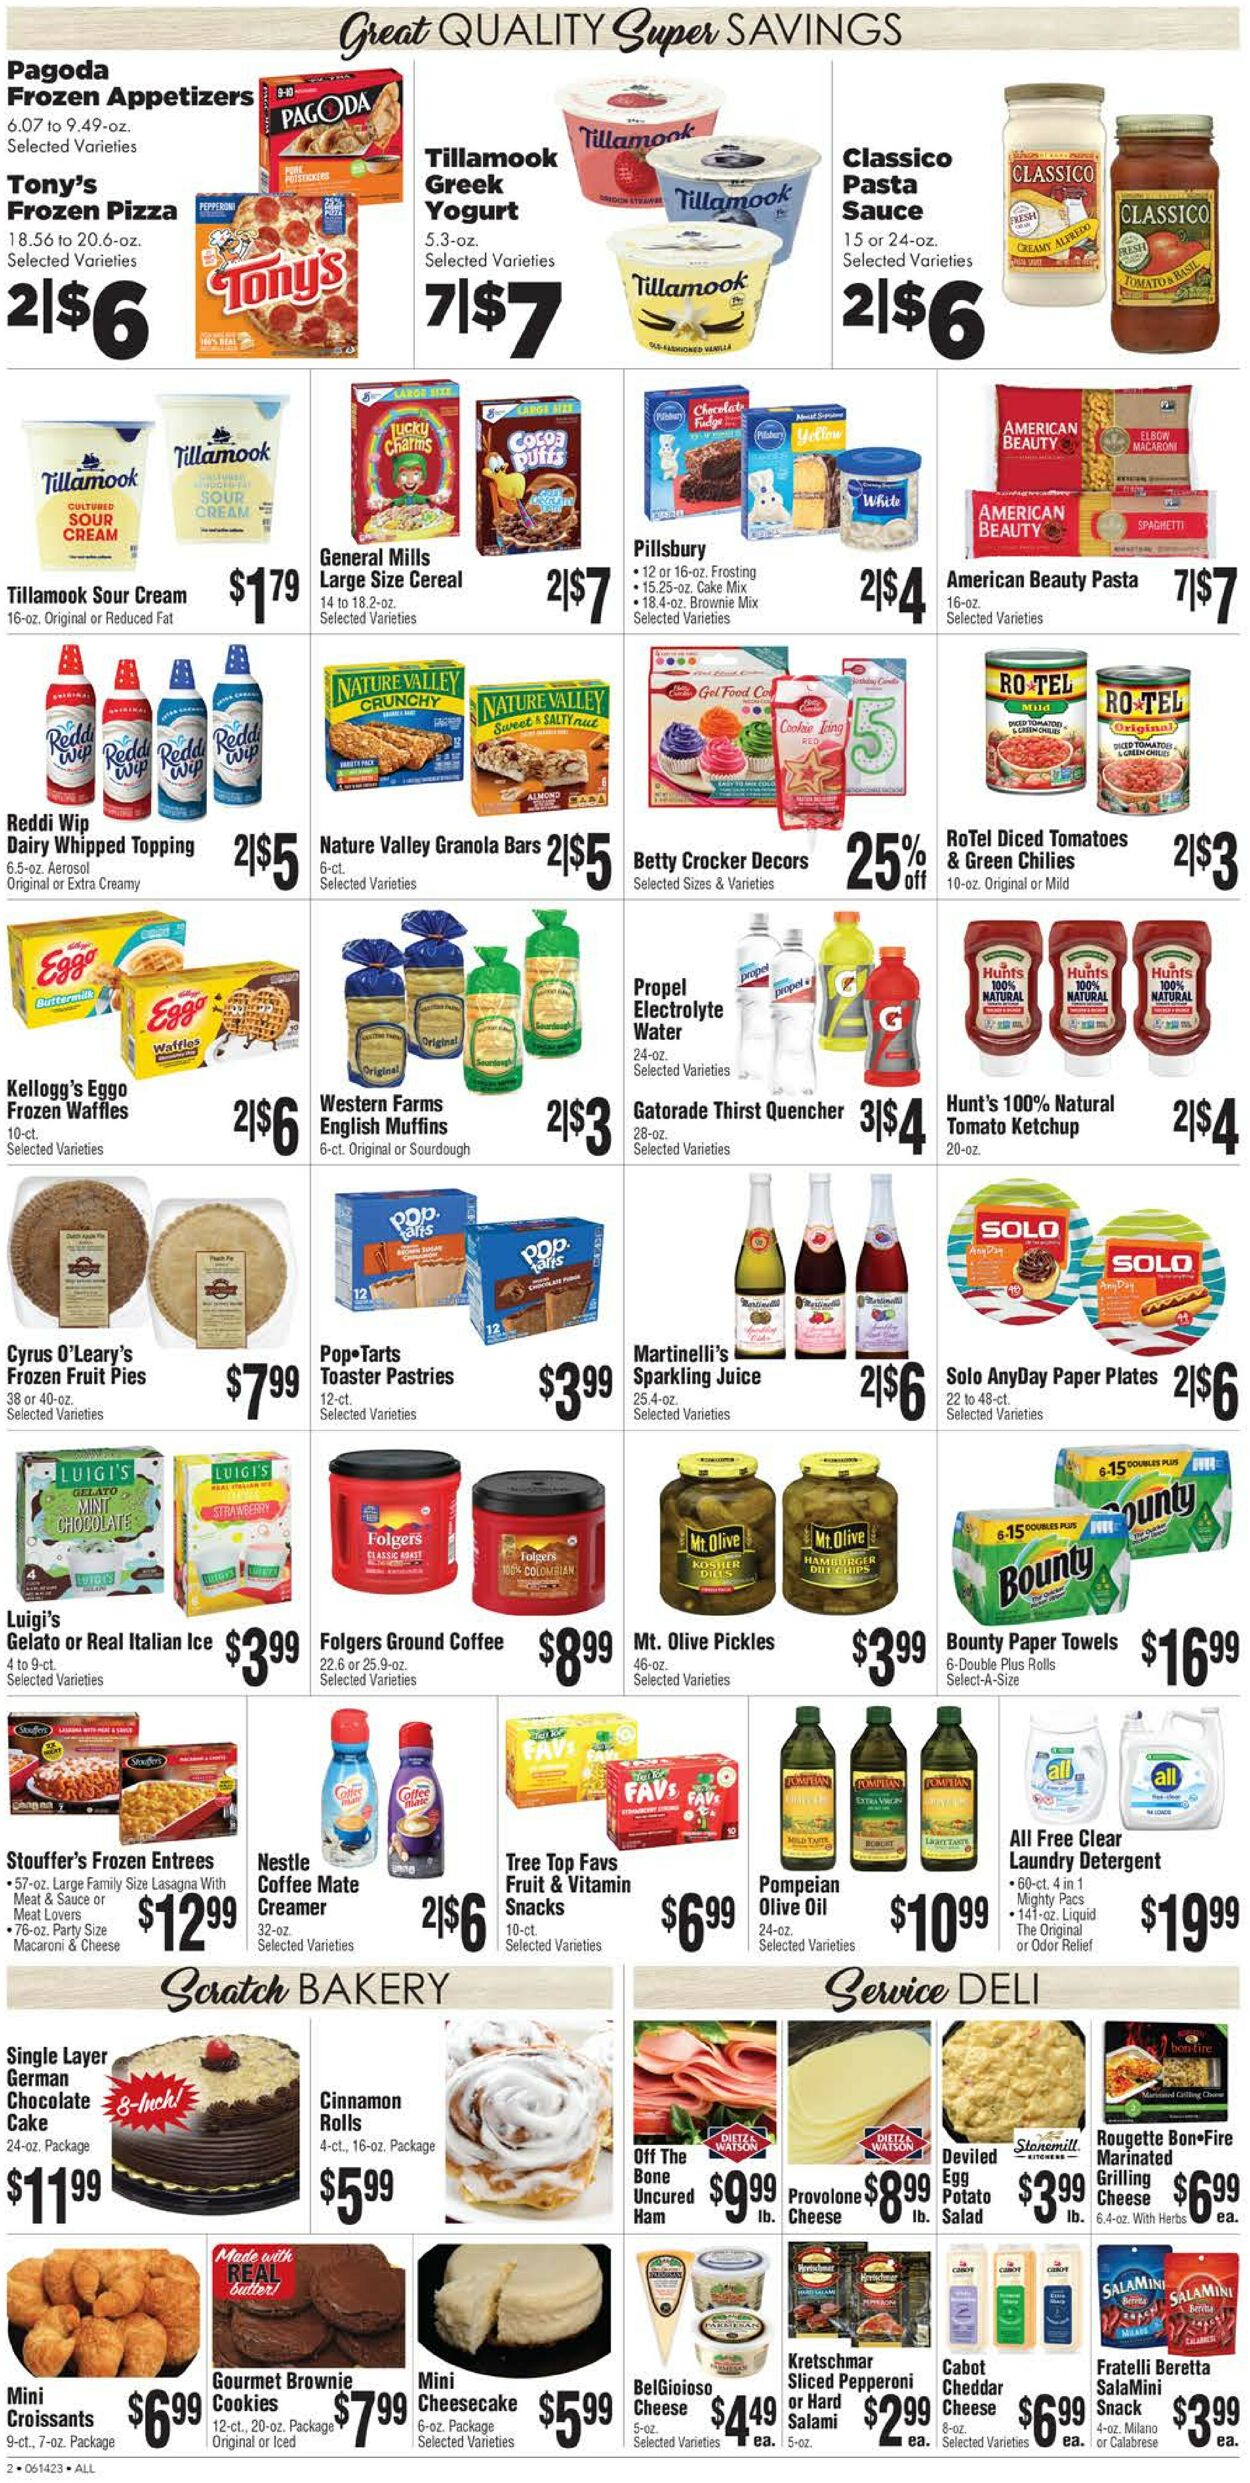 Rosauers Ad from 06/18/2023